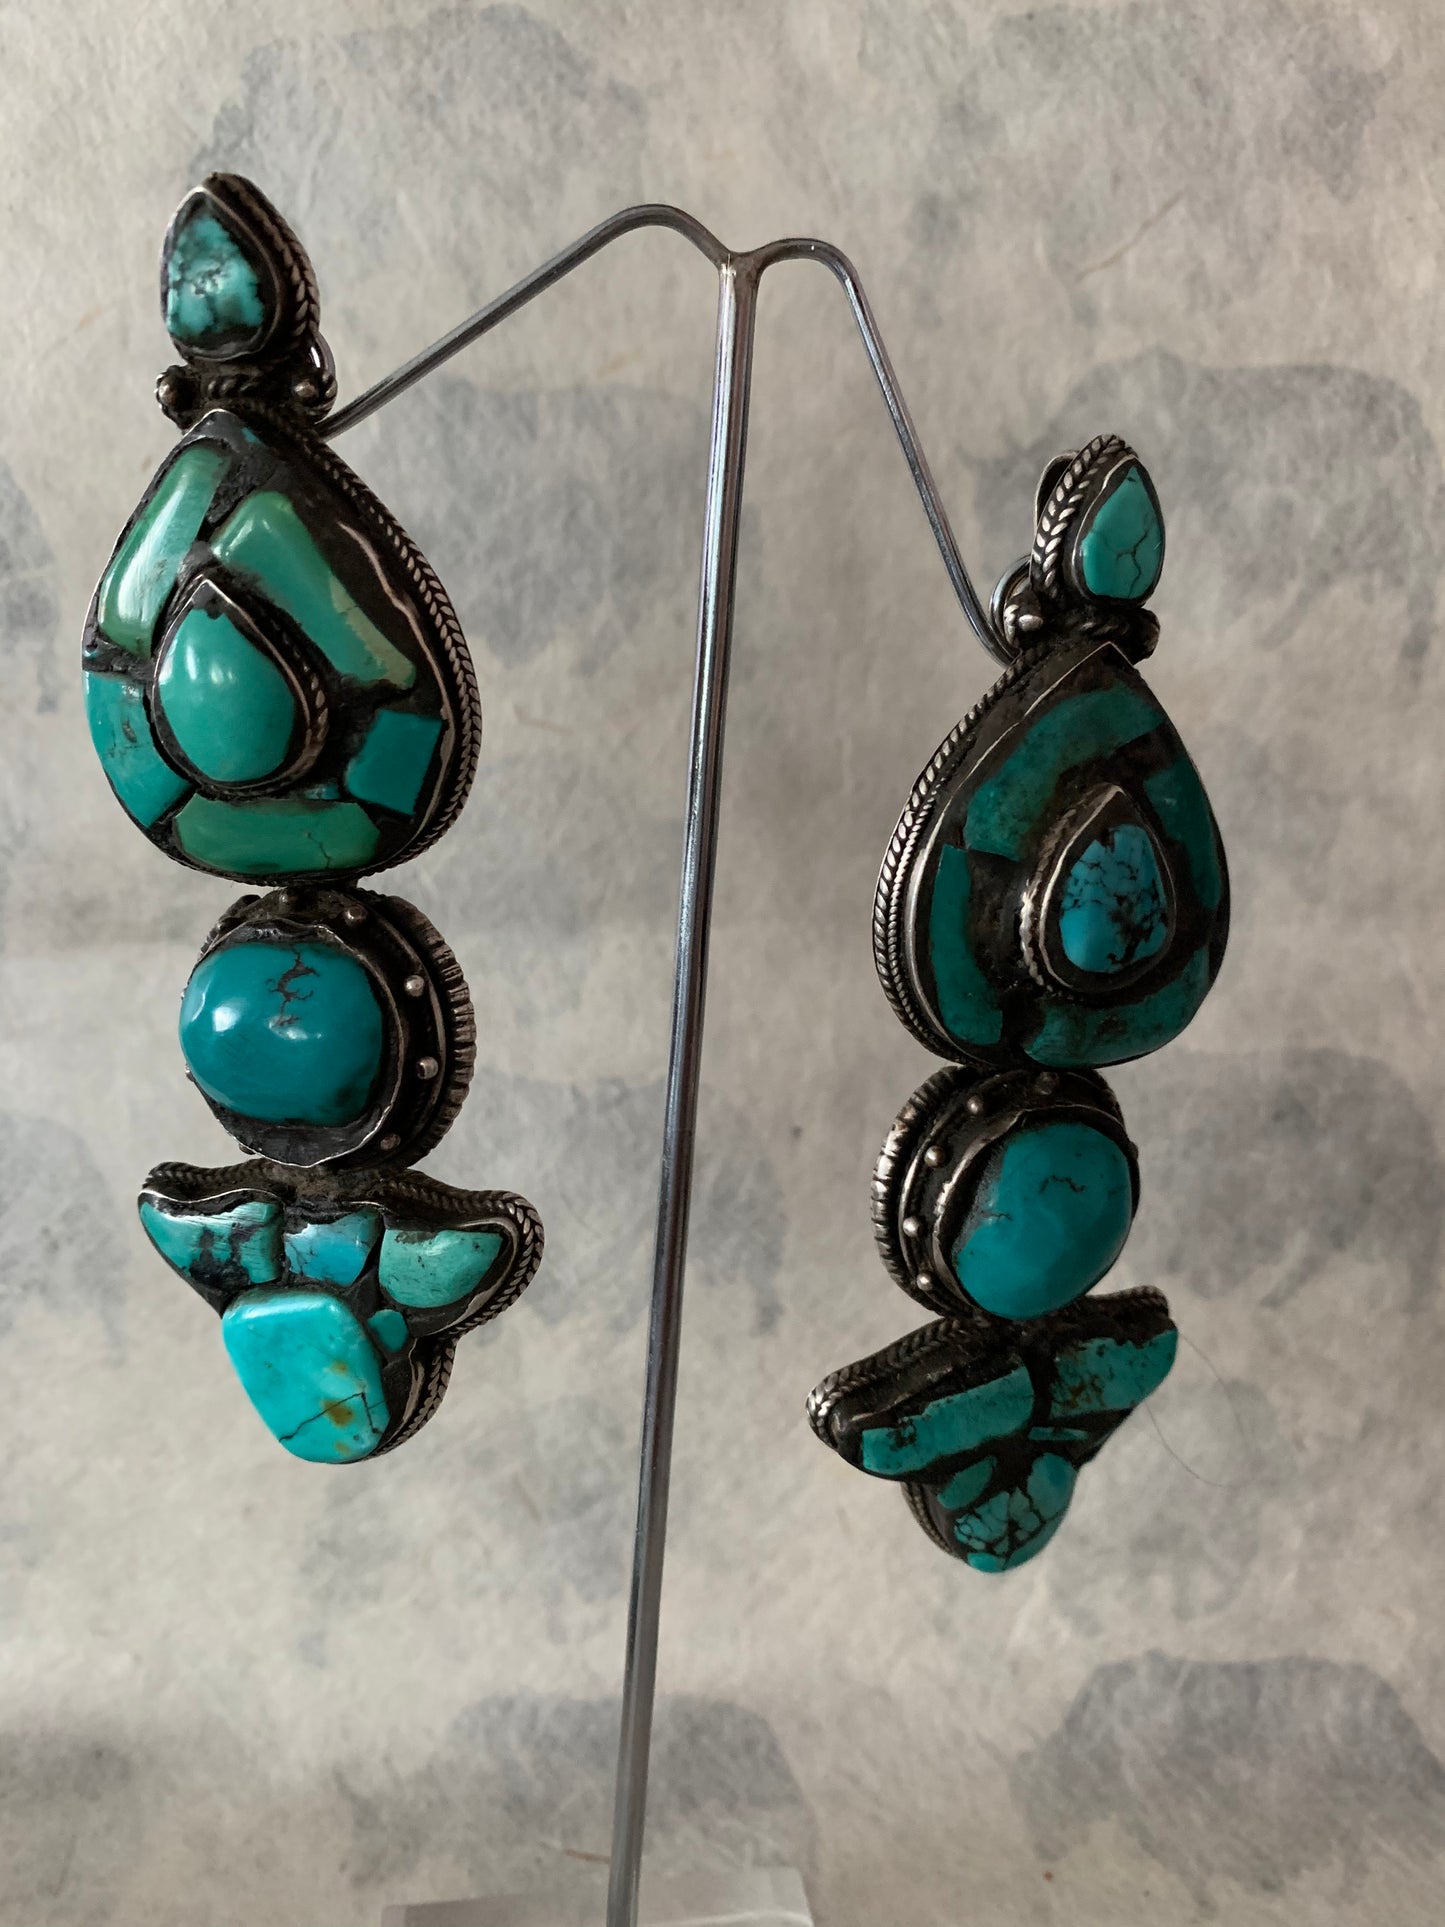 A pair of antique Tibetan turquoise and silver ear pendants / earrings